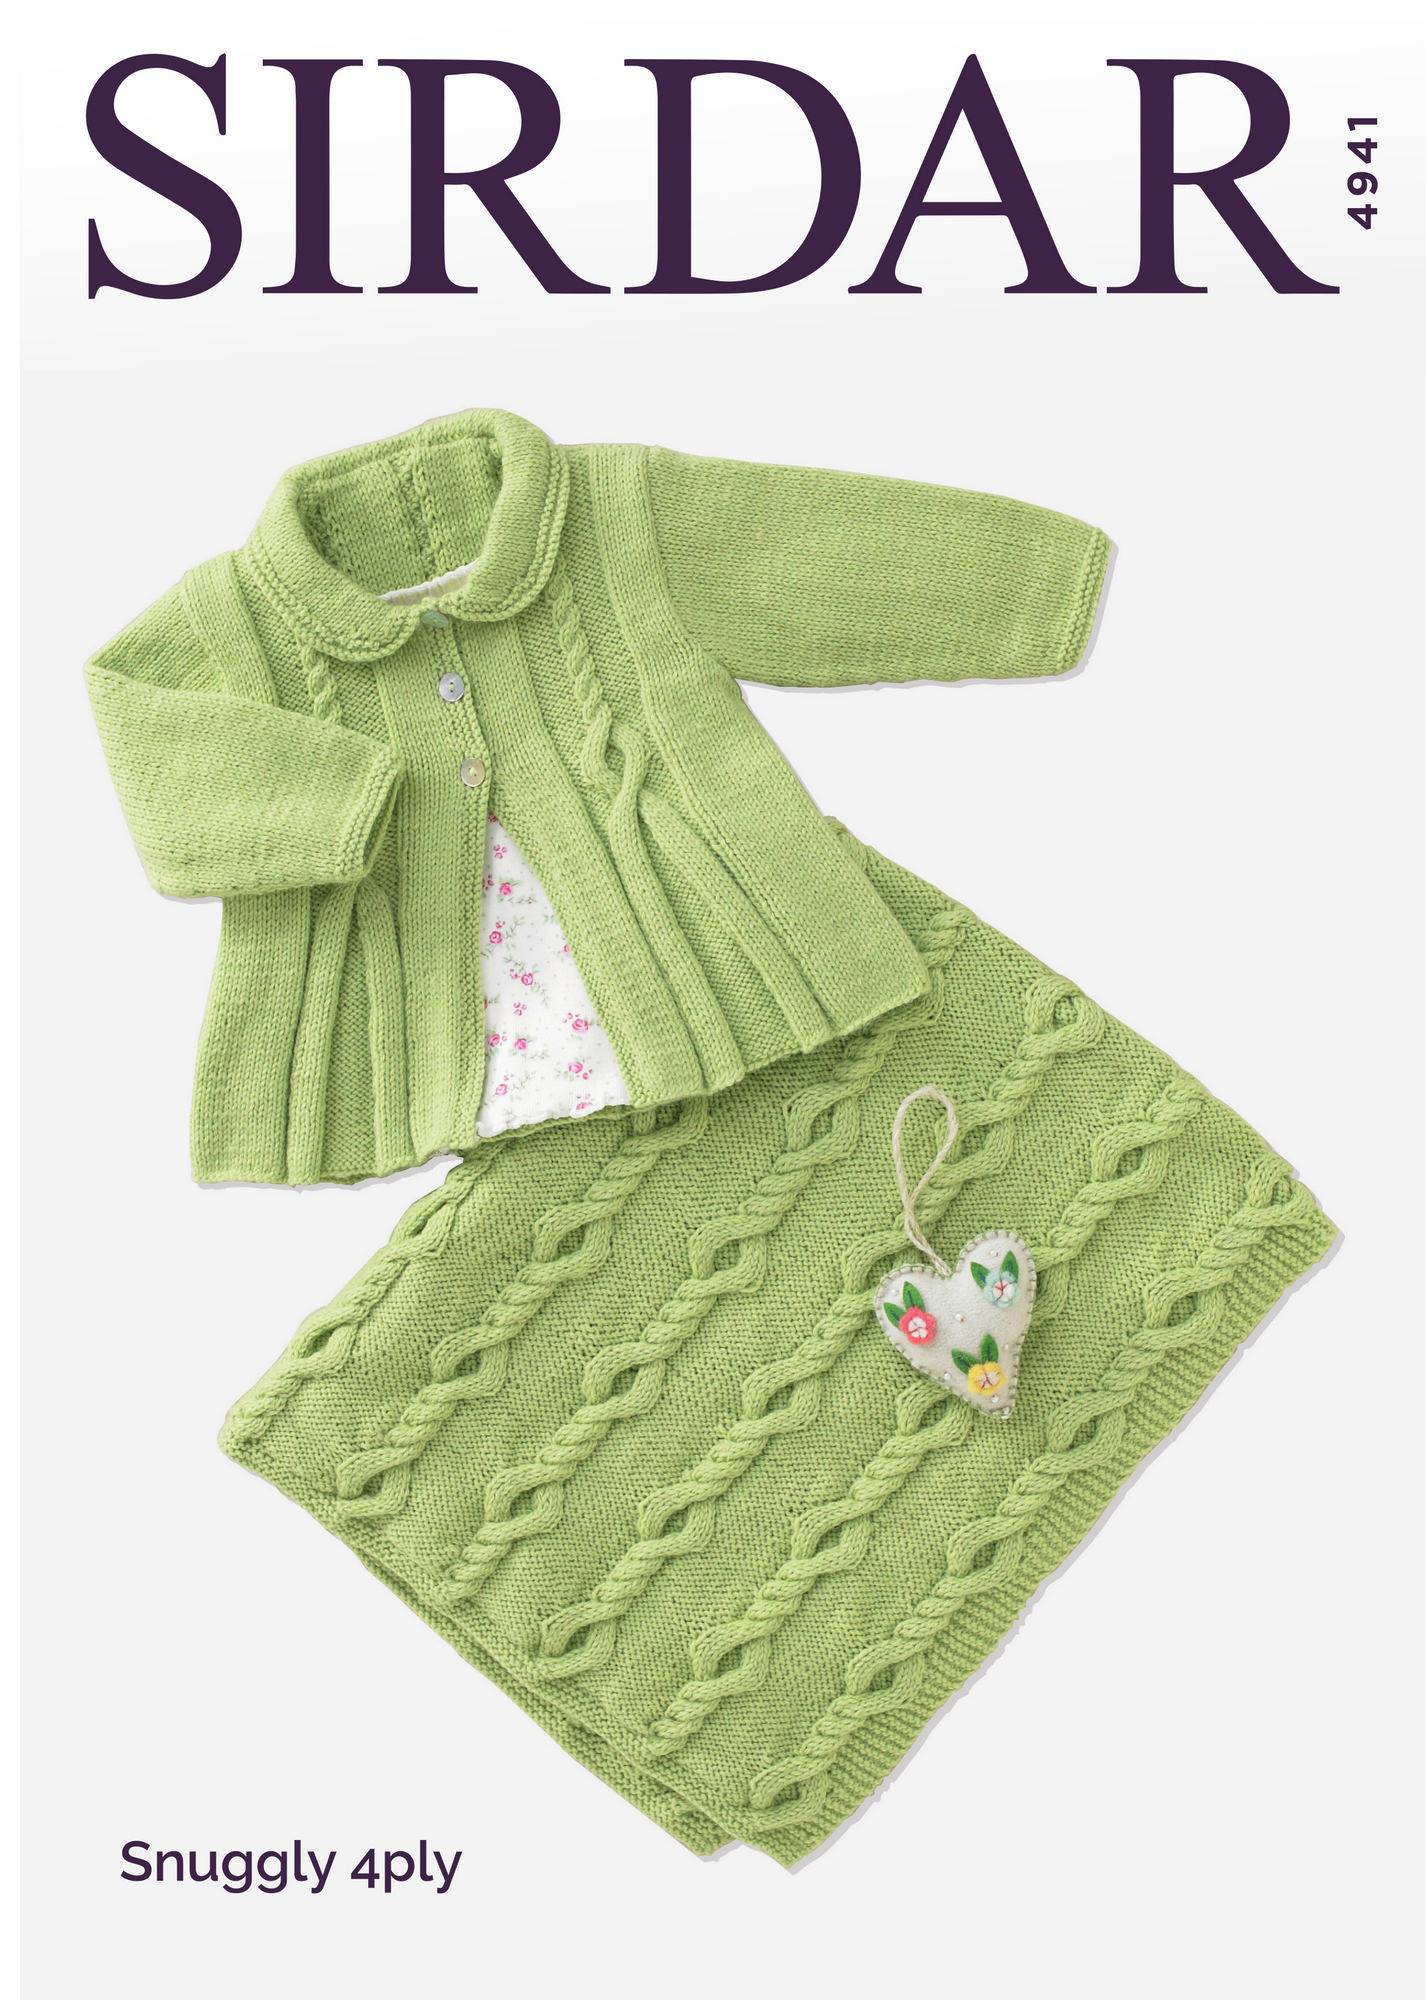 Matinee Coat and Blanket in Sirdar Snuggly 4 Ply (4941) | The Knitting ...